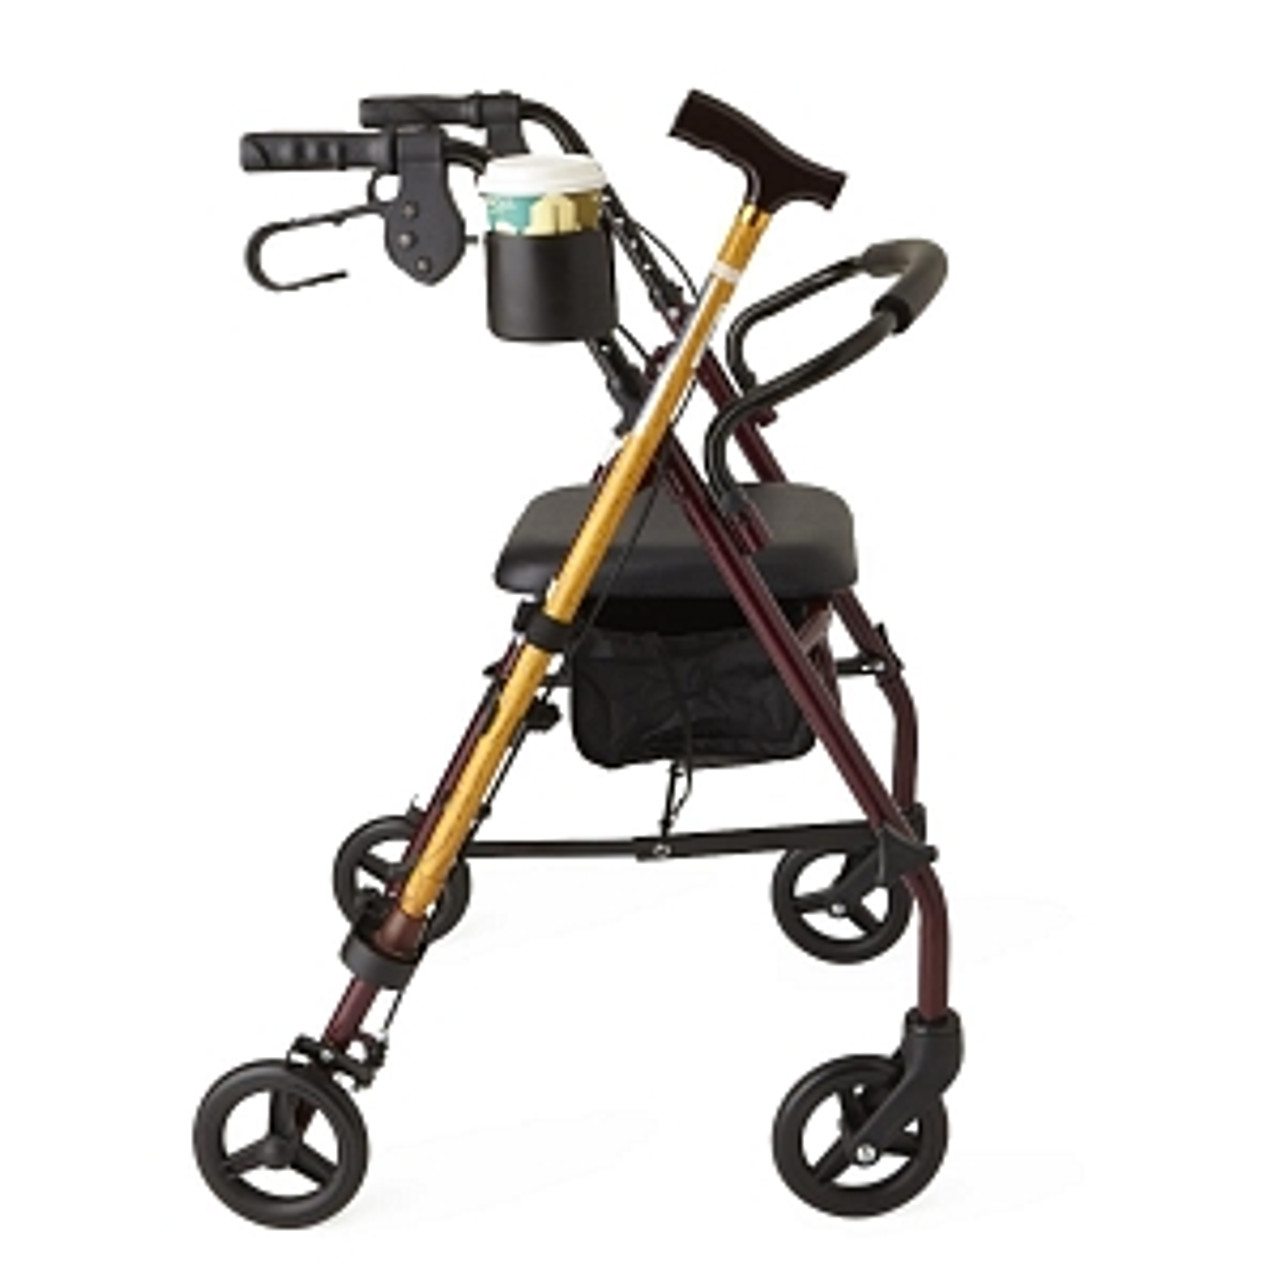 An easy way to carry cups or canes while using the rollator
Convenient cut-out accommodates cup handles